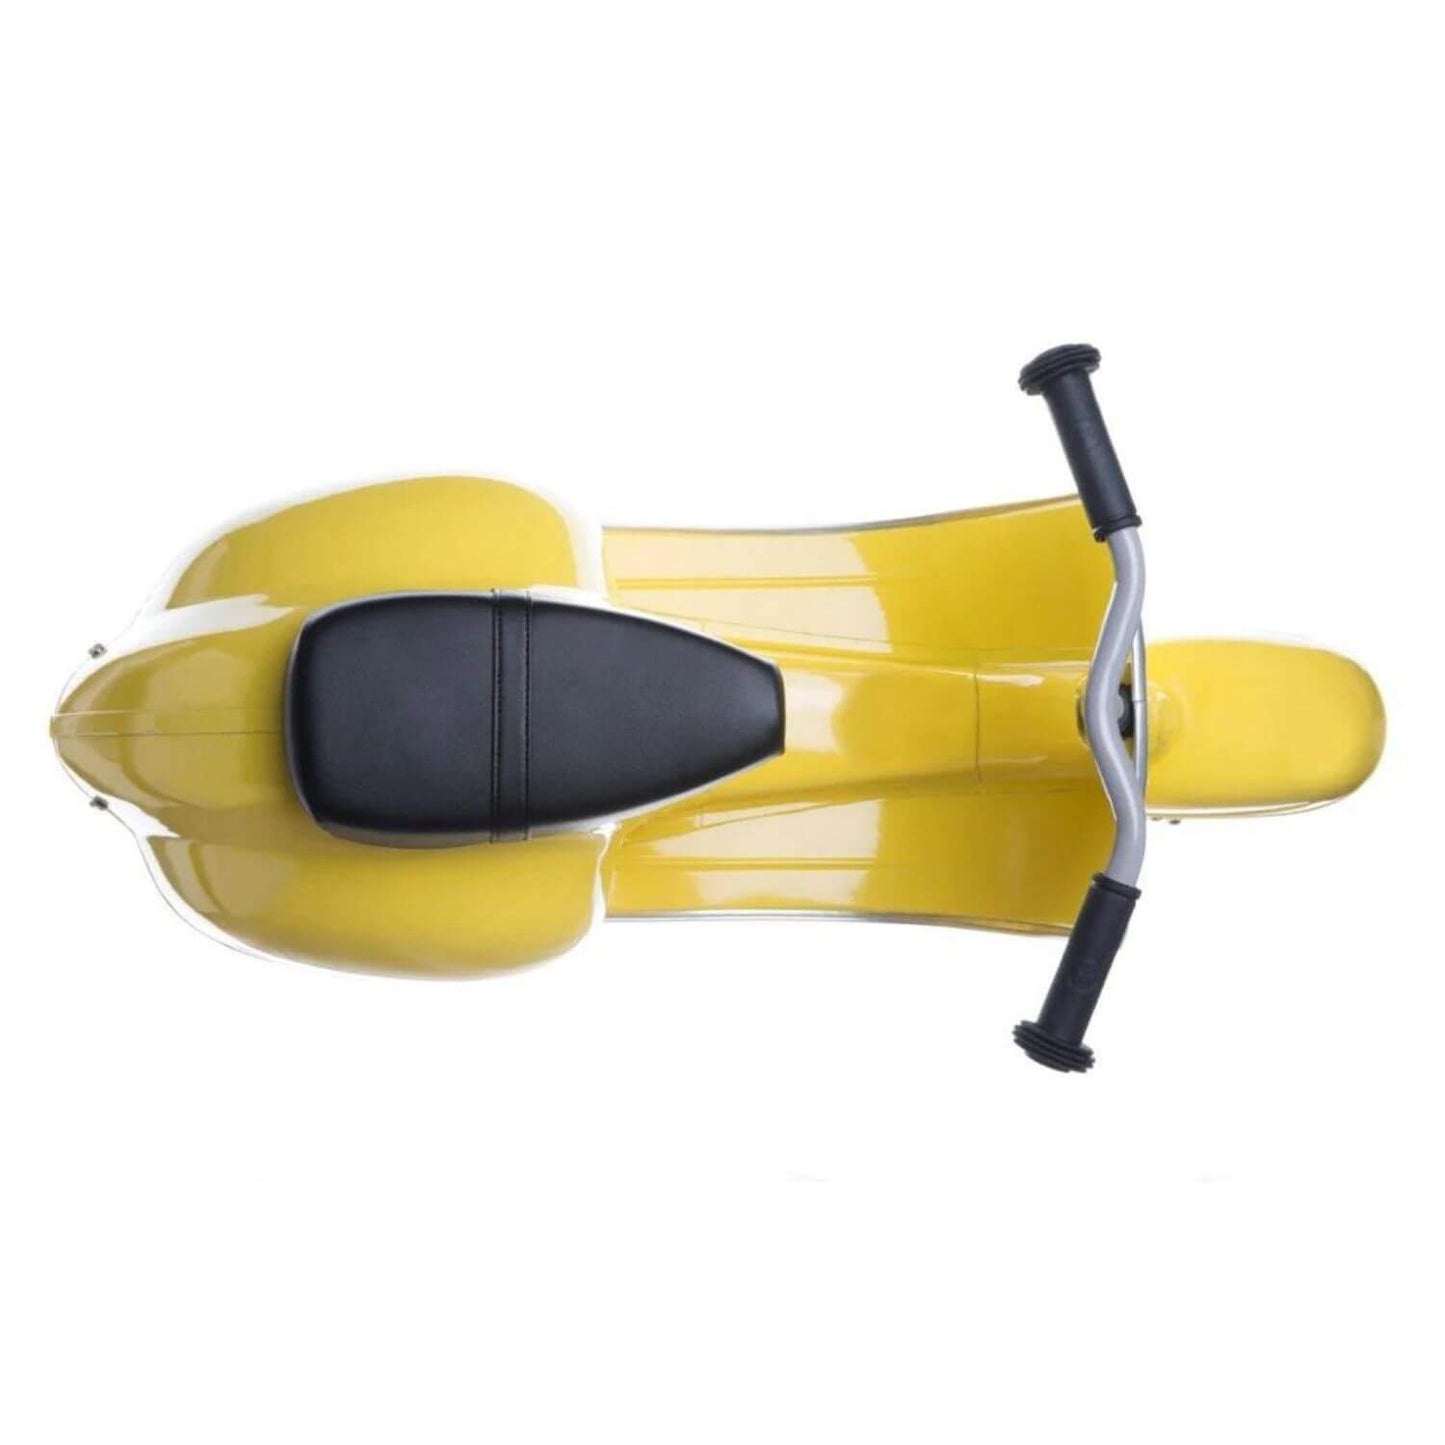 Primo Classic Ride-On Scooter Yellow - Top View